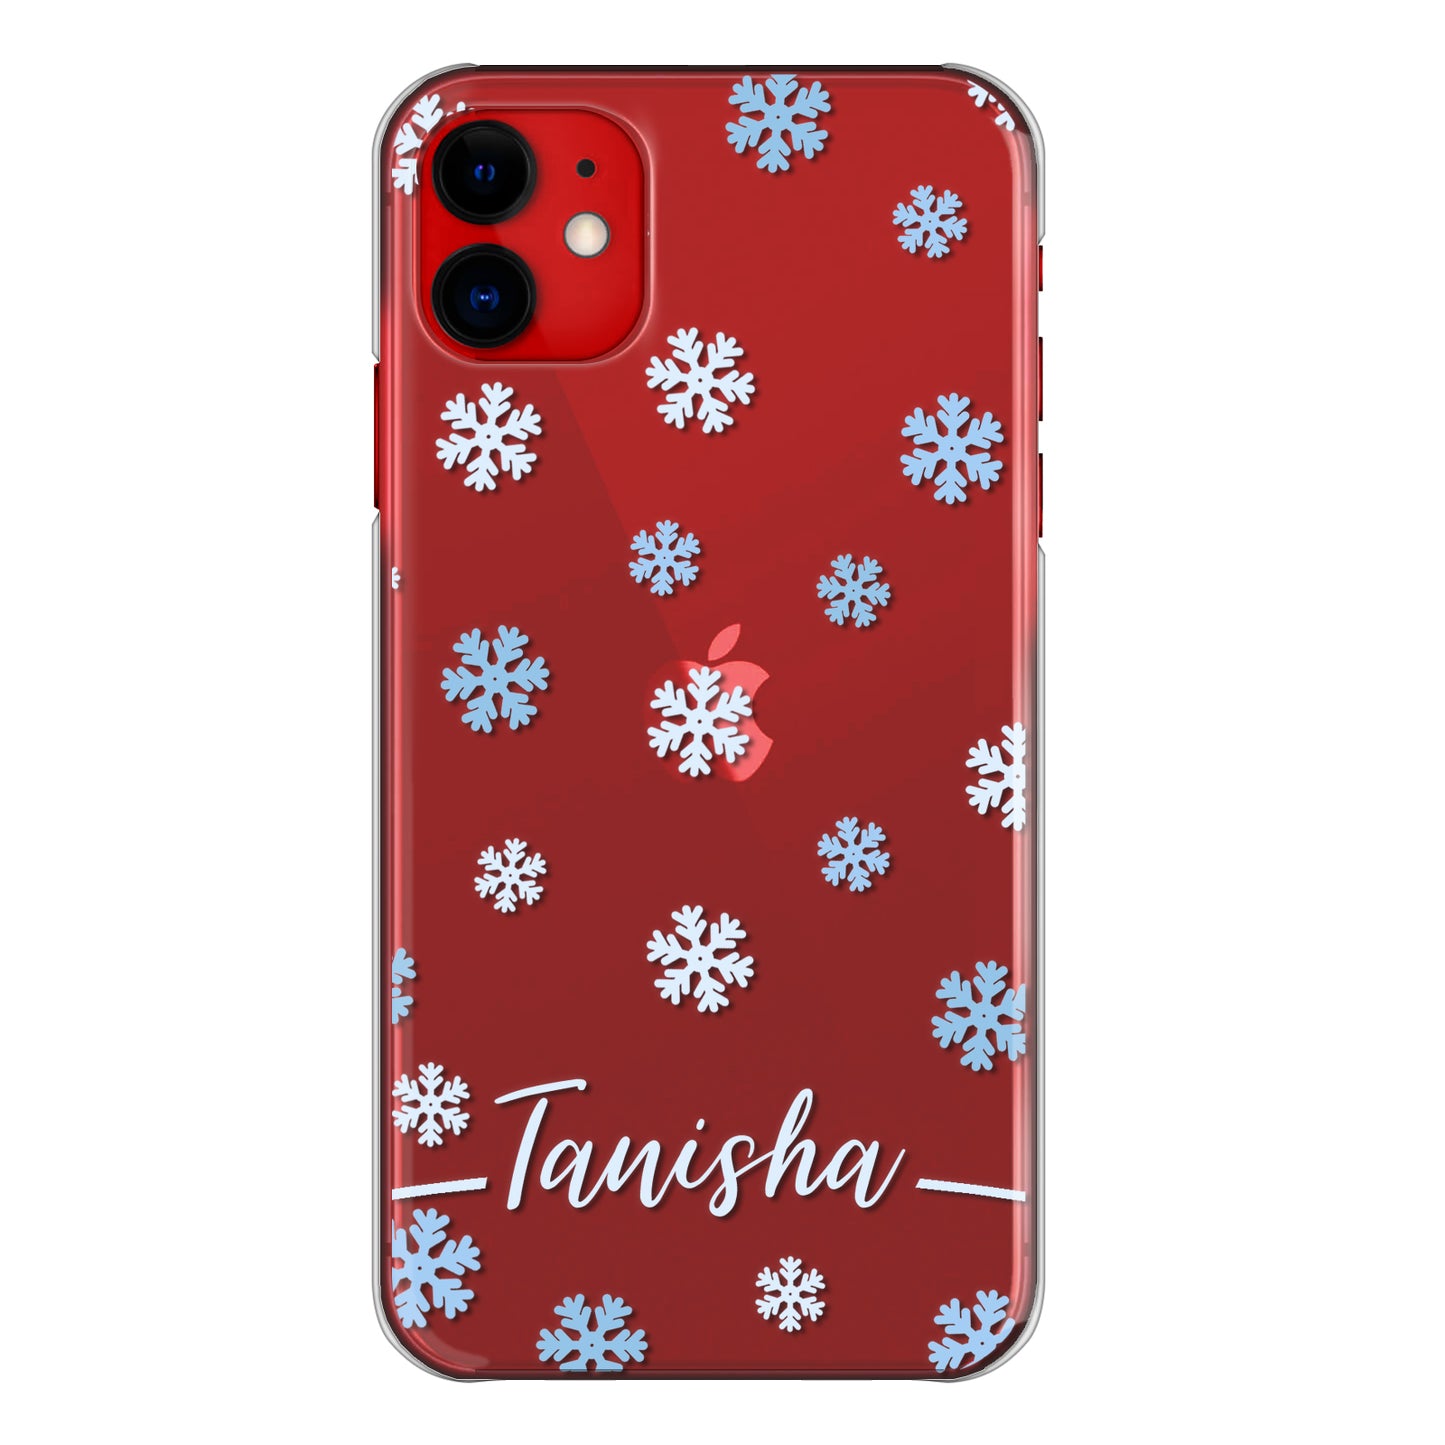 Personalised Samsung Galaxy Phone Hard Case with Falling Snowflakes and Stylish White Text